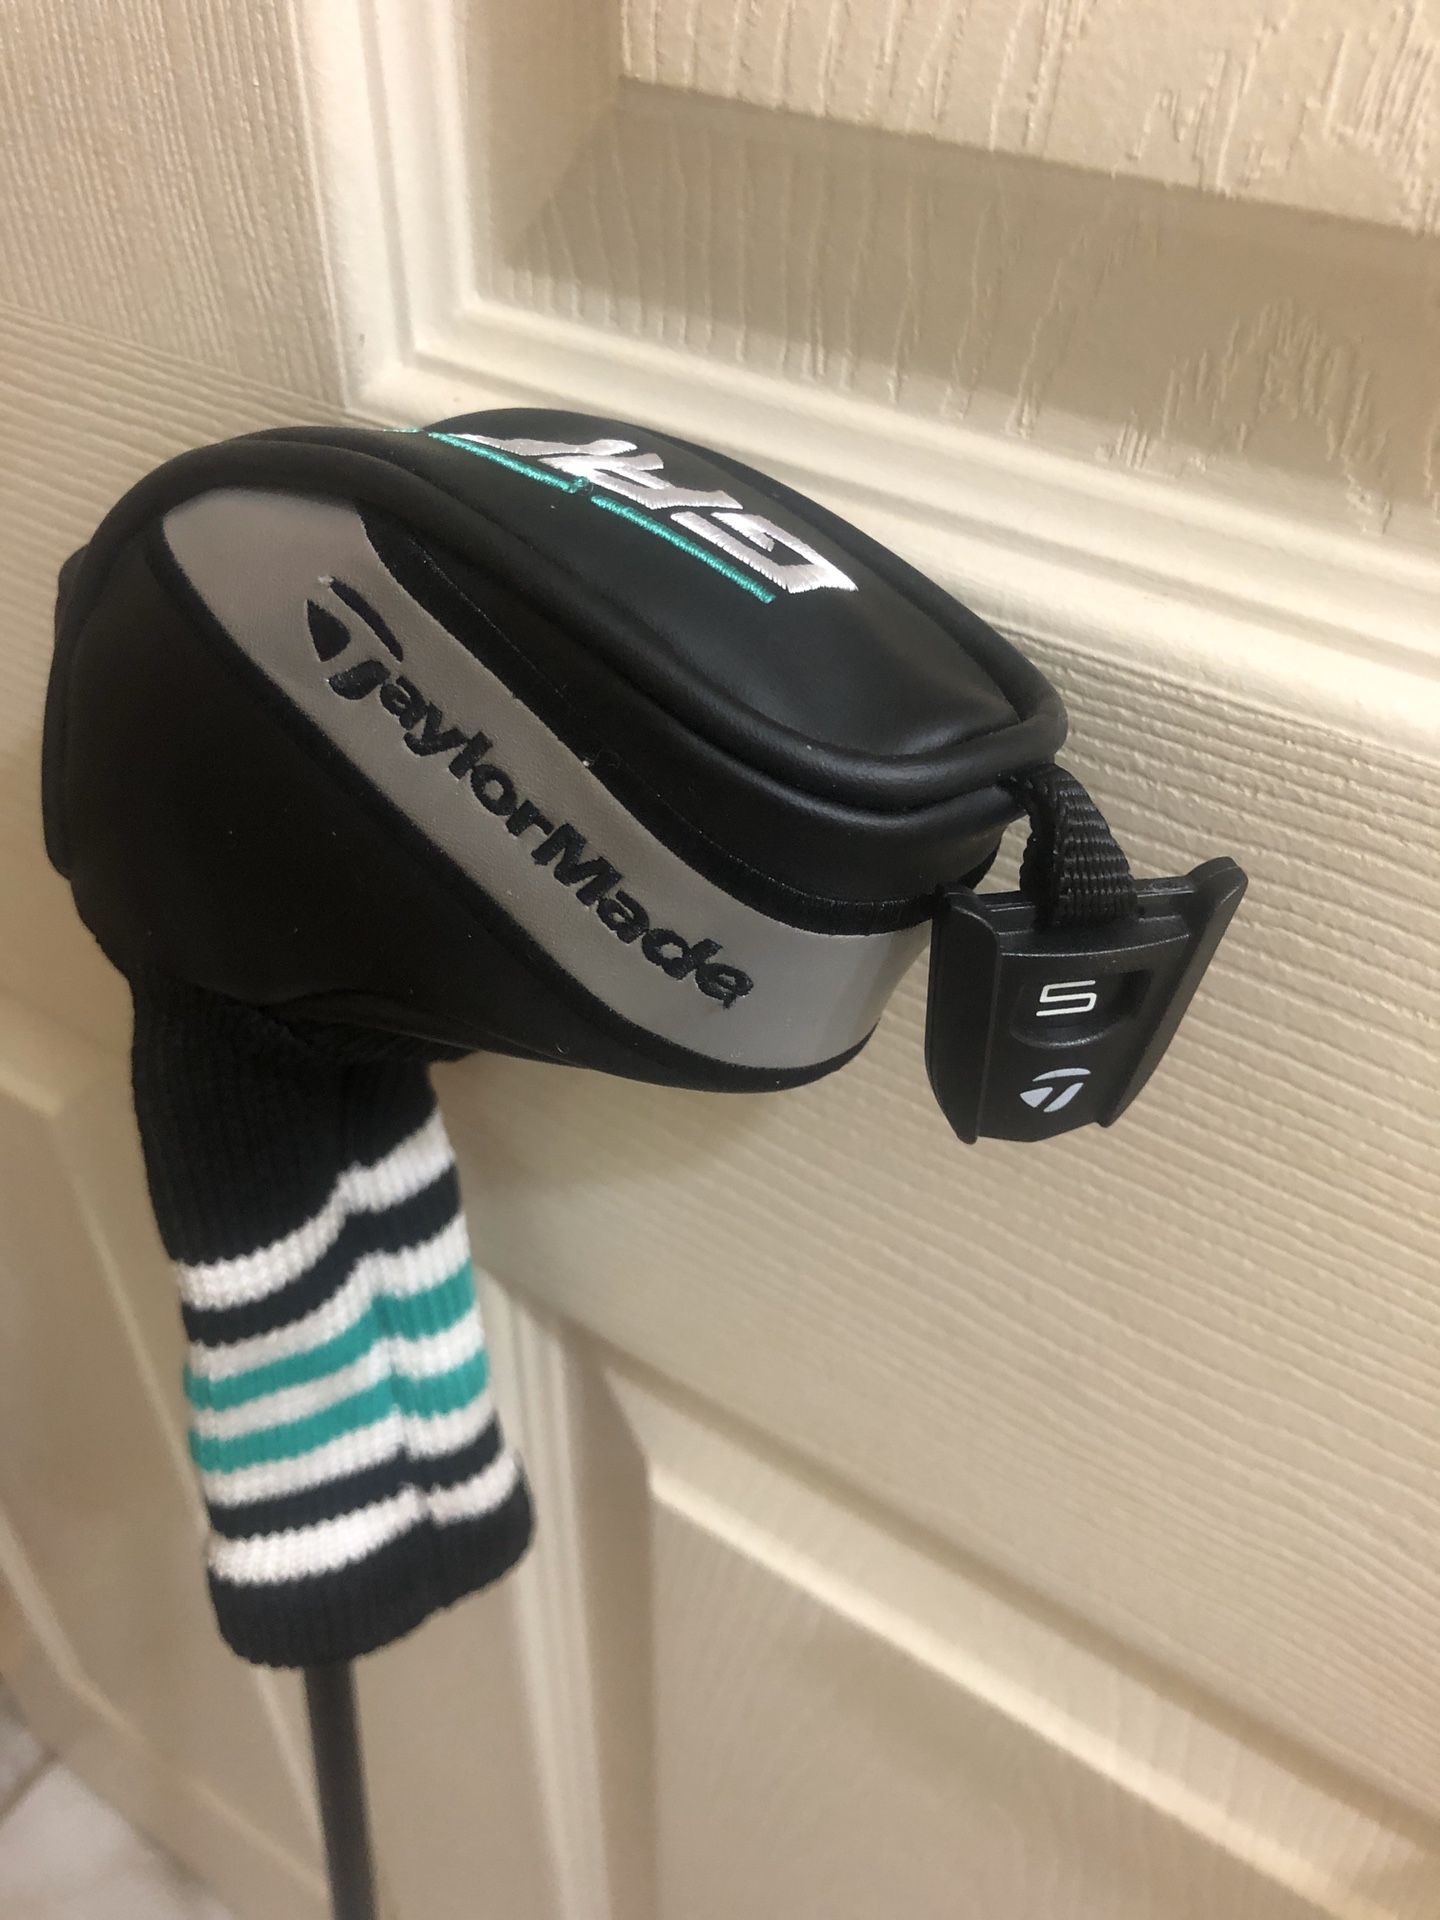 Taylormade GAPR Mid 5 Hybrid with interchangeable head cover